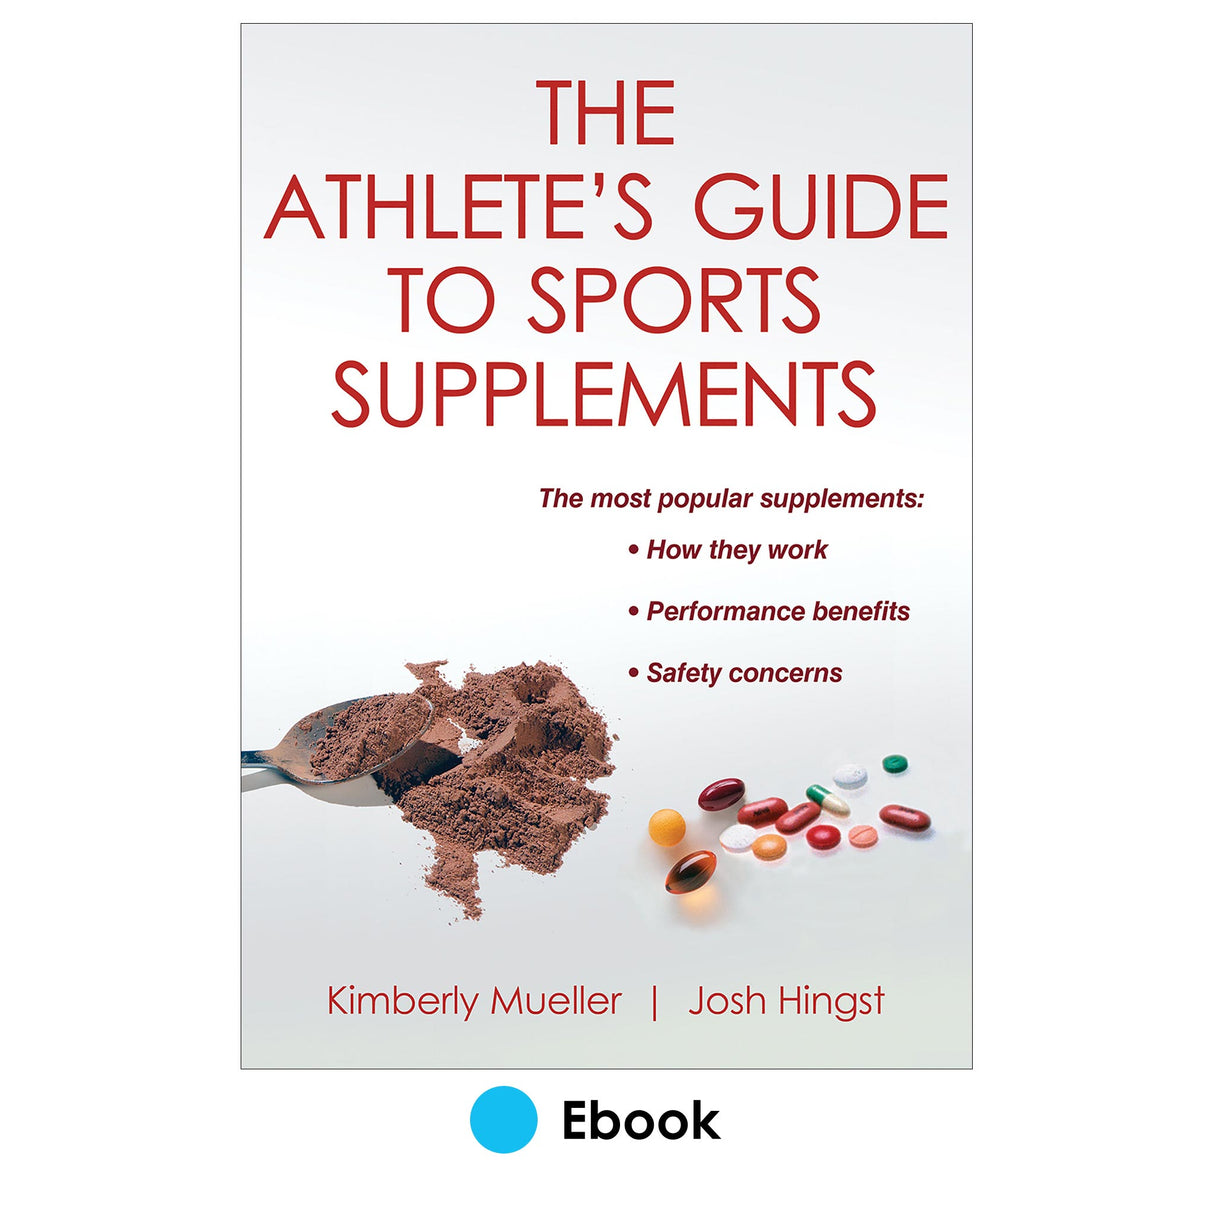 Athlete's Guide to Sports Supplements PDF, The